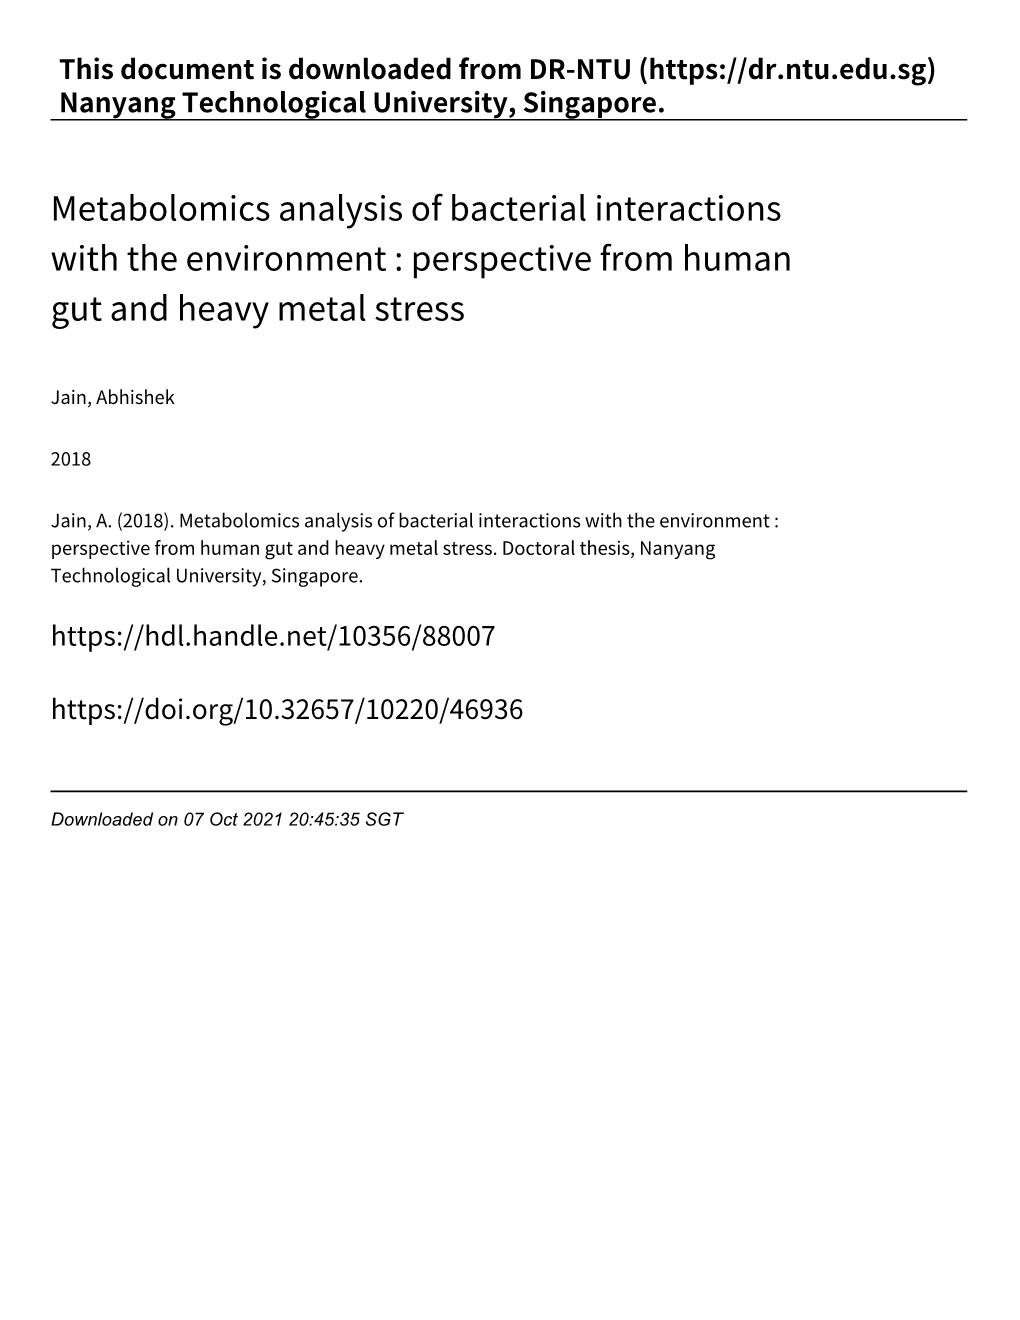 Metabolomics Analysis of Bacterial Interactions with the Environment : Perspective from Human Gut and Heavy Metal Stress